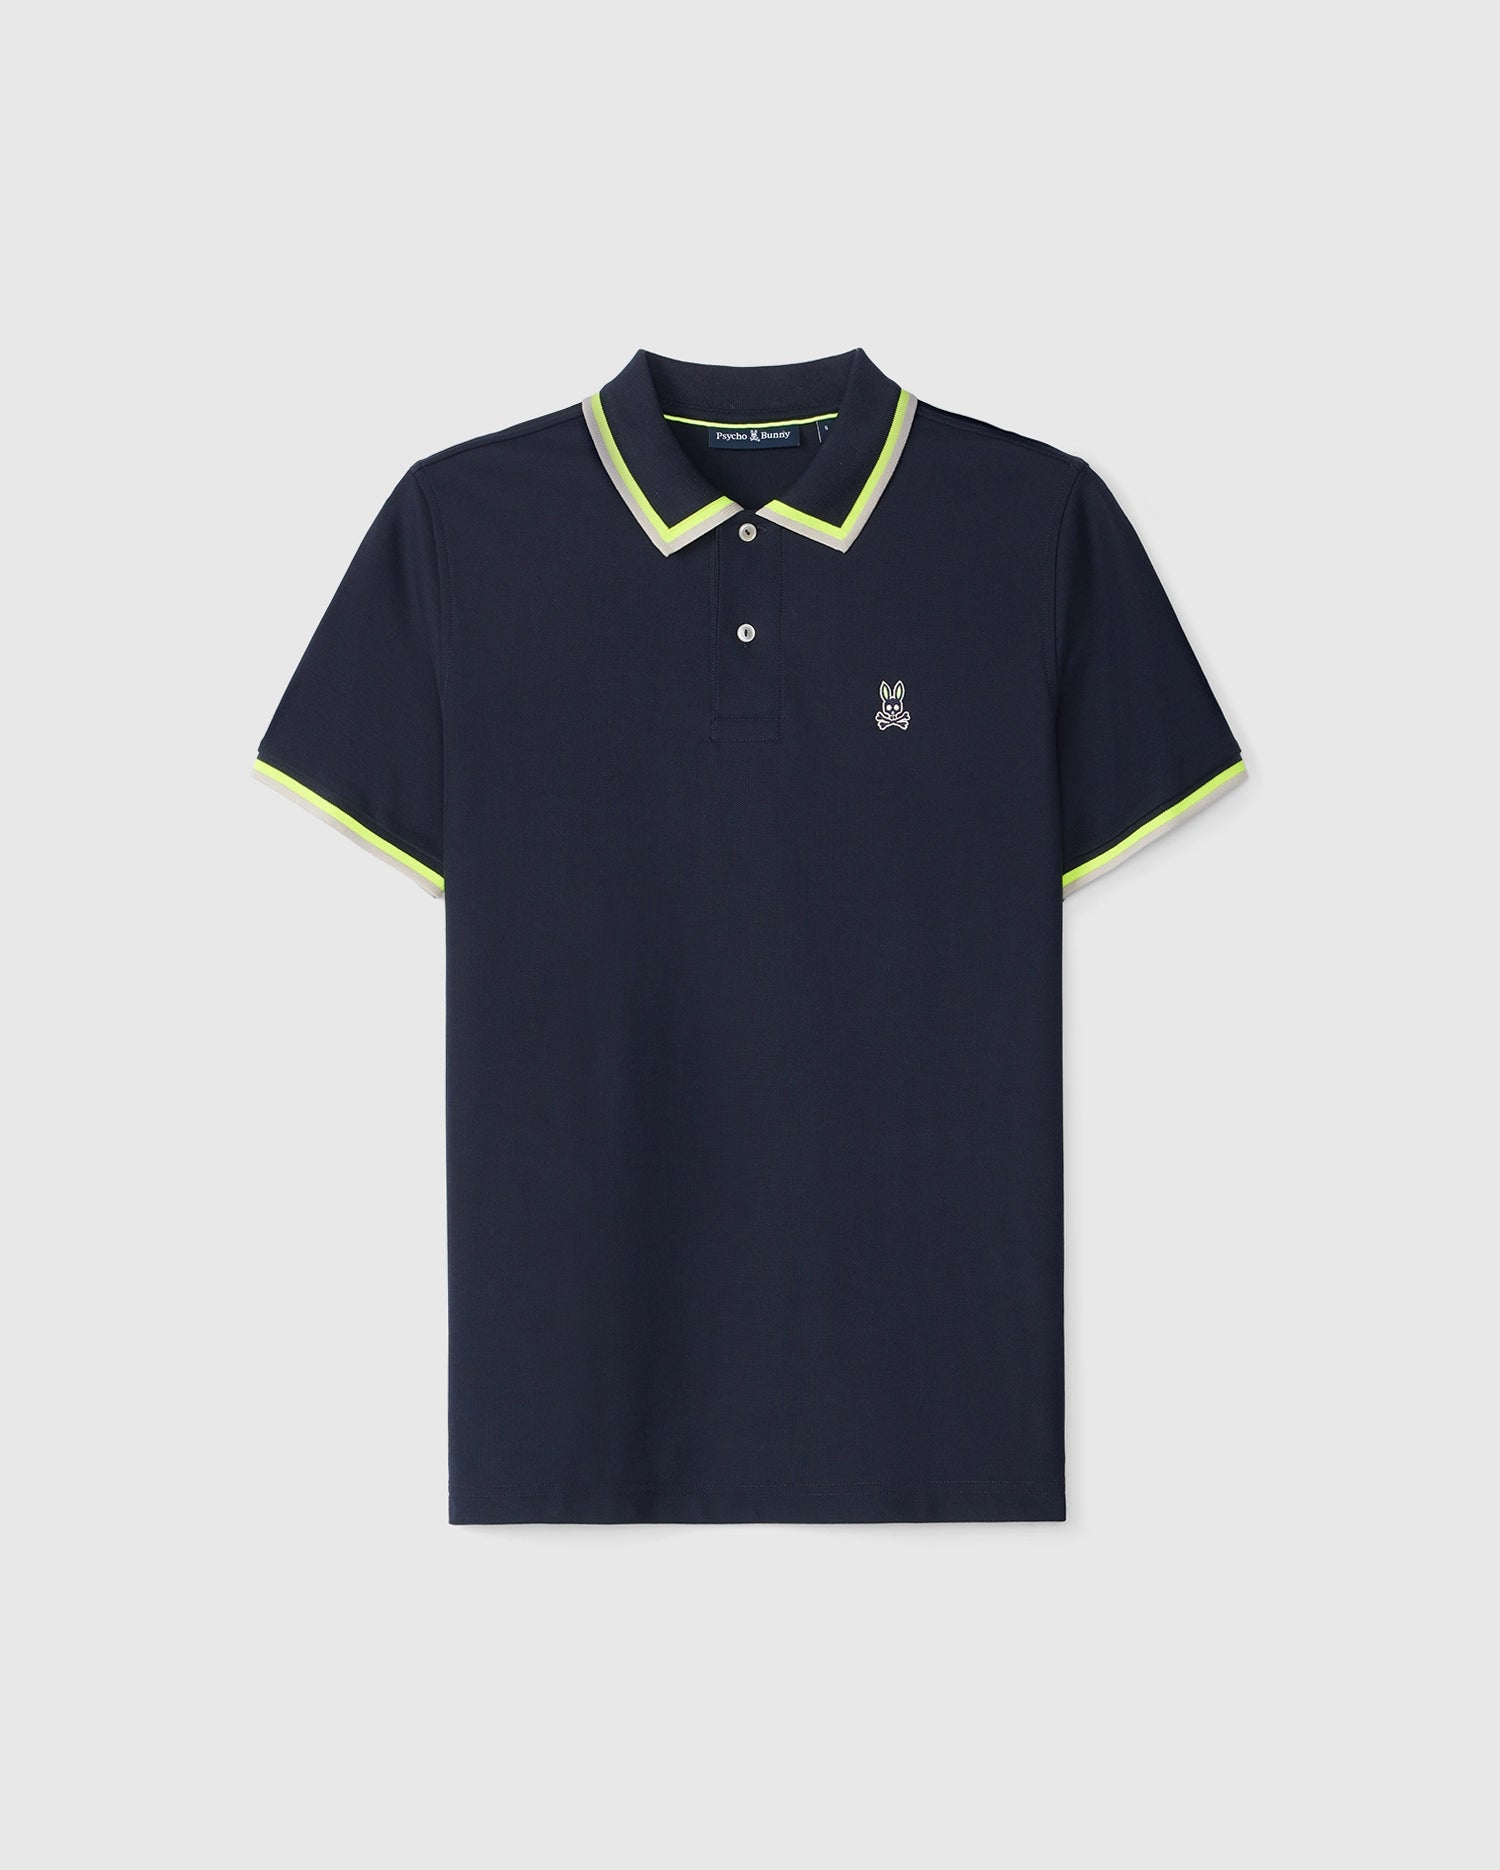 Navy blue Psycho Bunny Kingsbury piqué polo shirt with contrasting yellow and green ribbed collar and sleeve trim, featuring a small white logo on the left chest, displayed on a plain background.